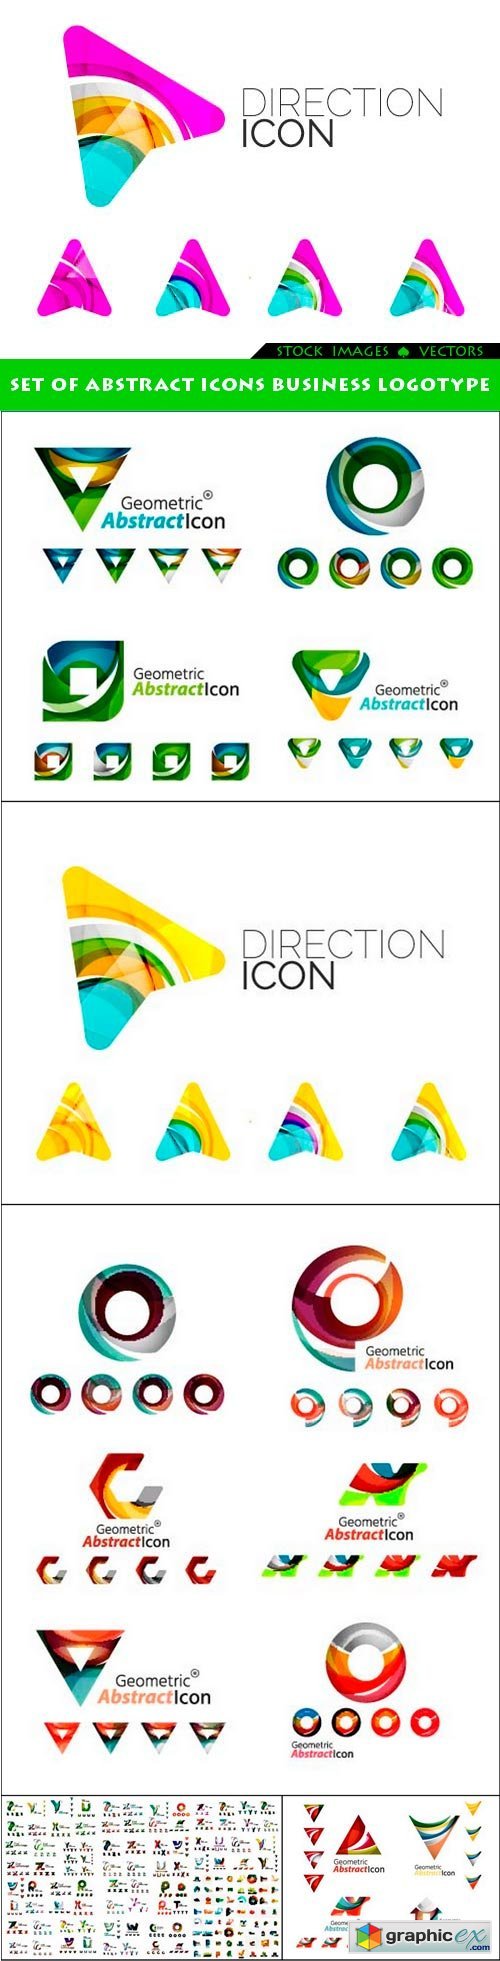 Set of abstract icons business logotype 6x EPS